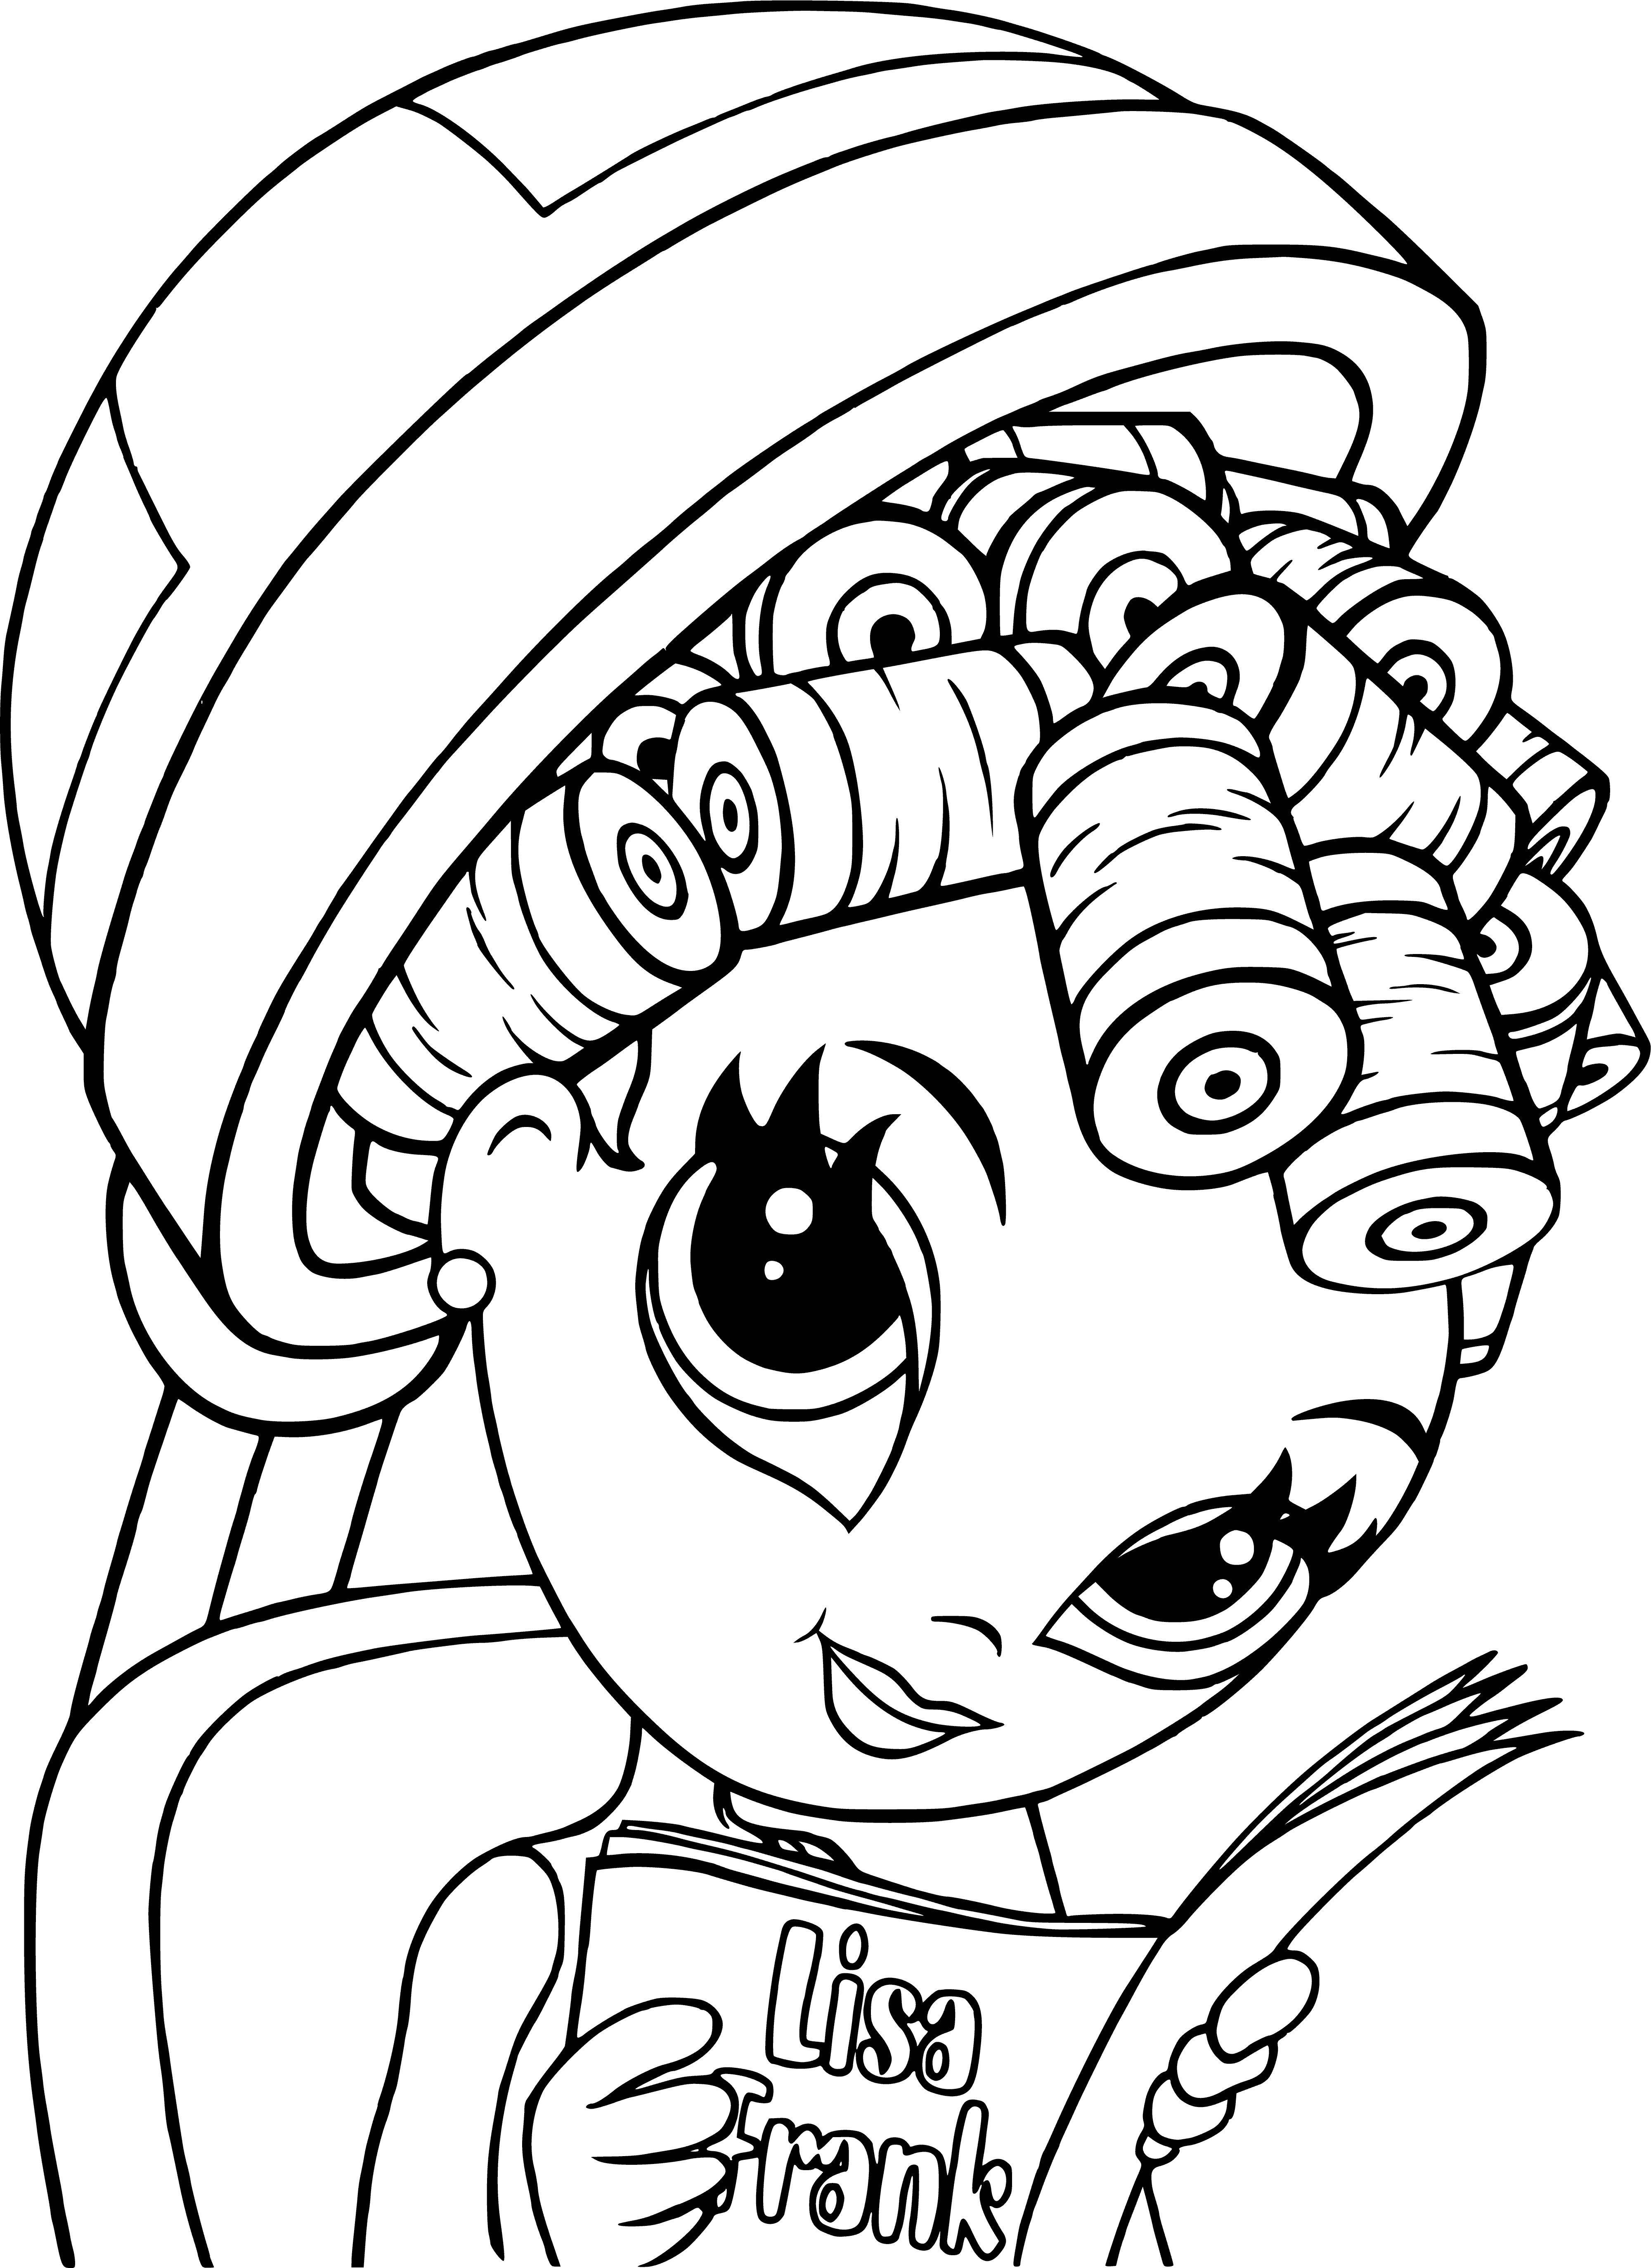 coloring page: Glam girly look: pink dress w/white fur, up-do w/curls, pearl jewelry & pink flower in hair. #glamour #style